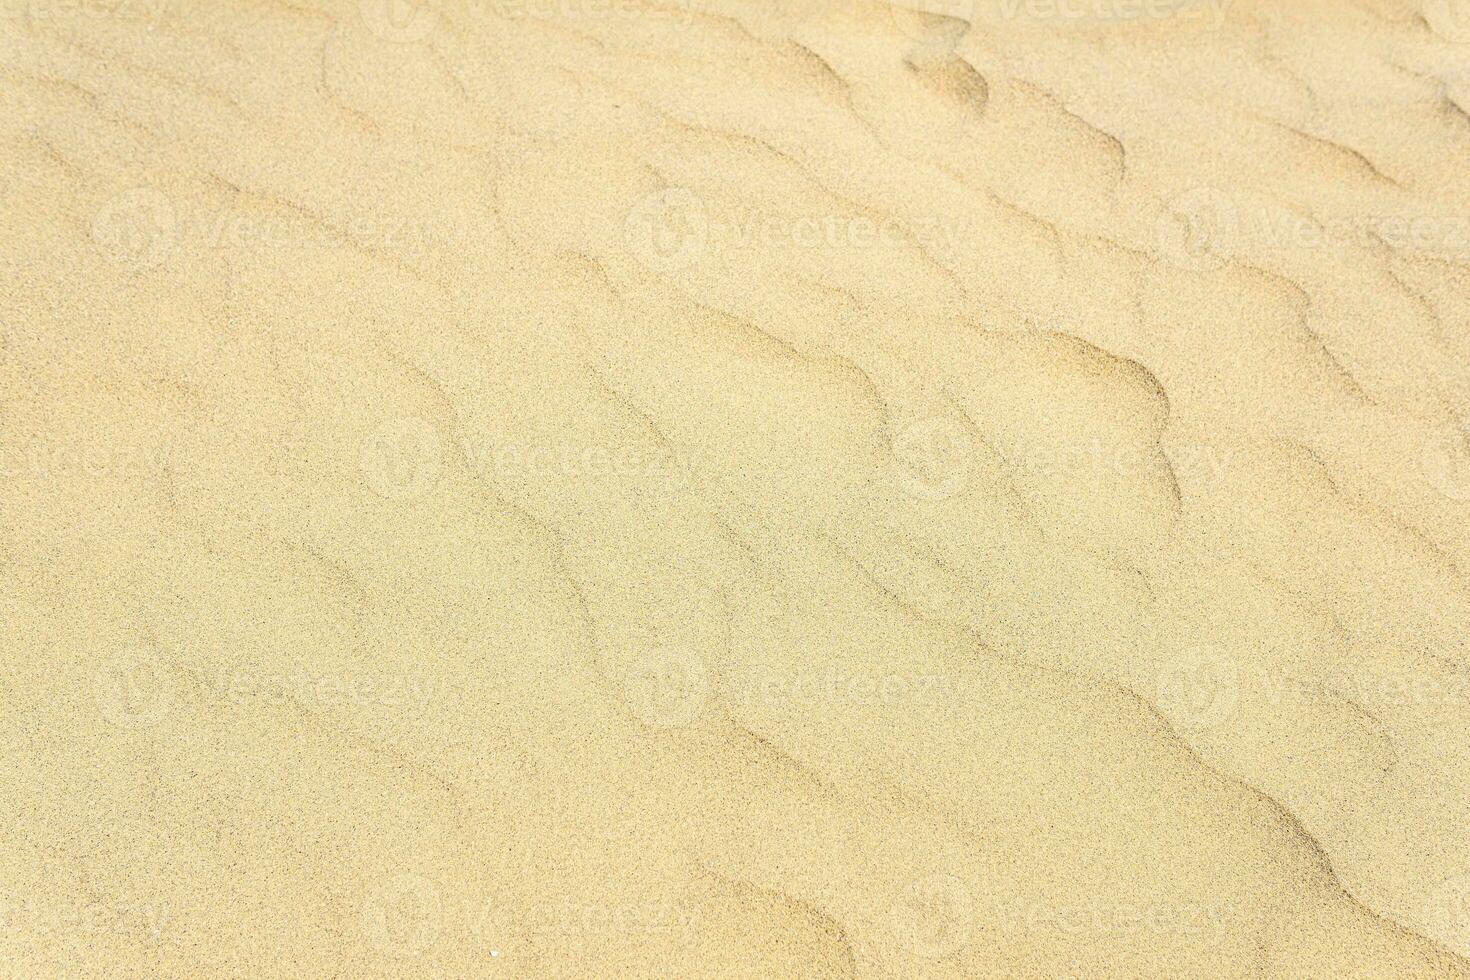 natural background, sandy desert surface with wind ripples photo